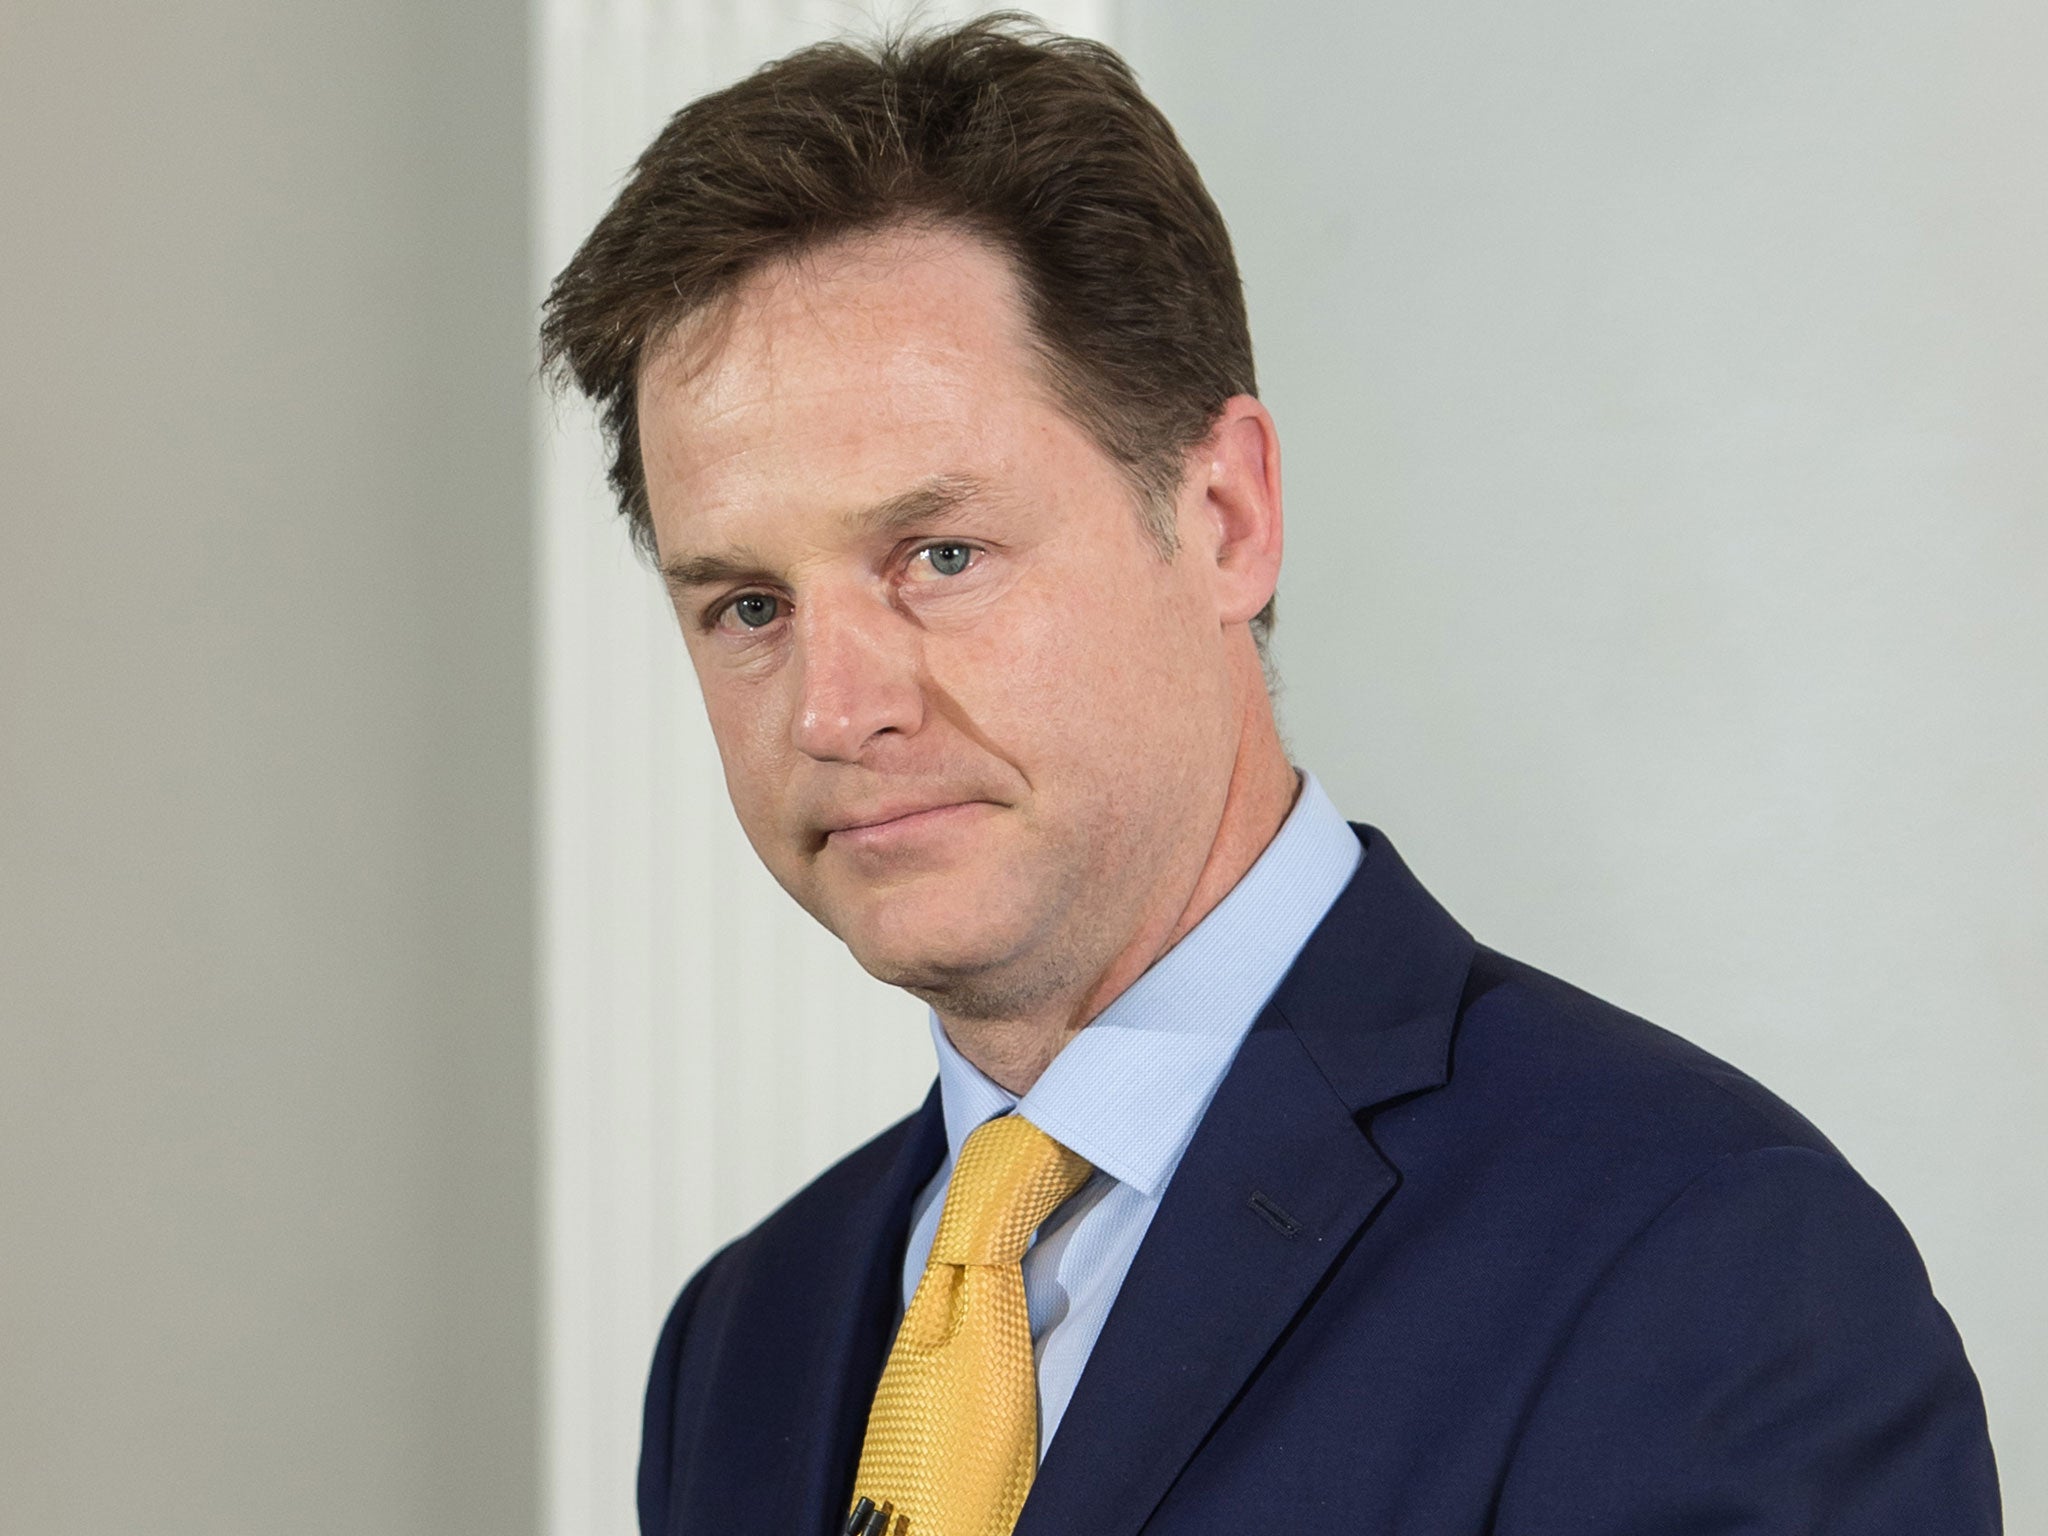 Mr Clegg’s failure to repeat the success of his 2010 debate performances was labelled as one of the factors